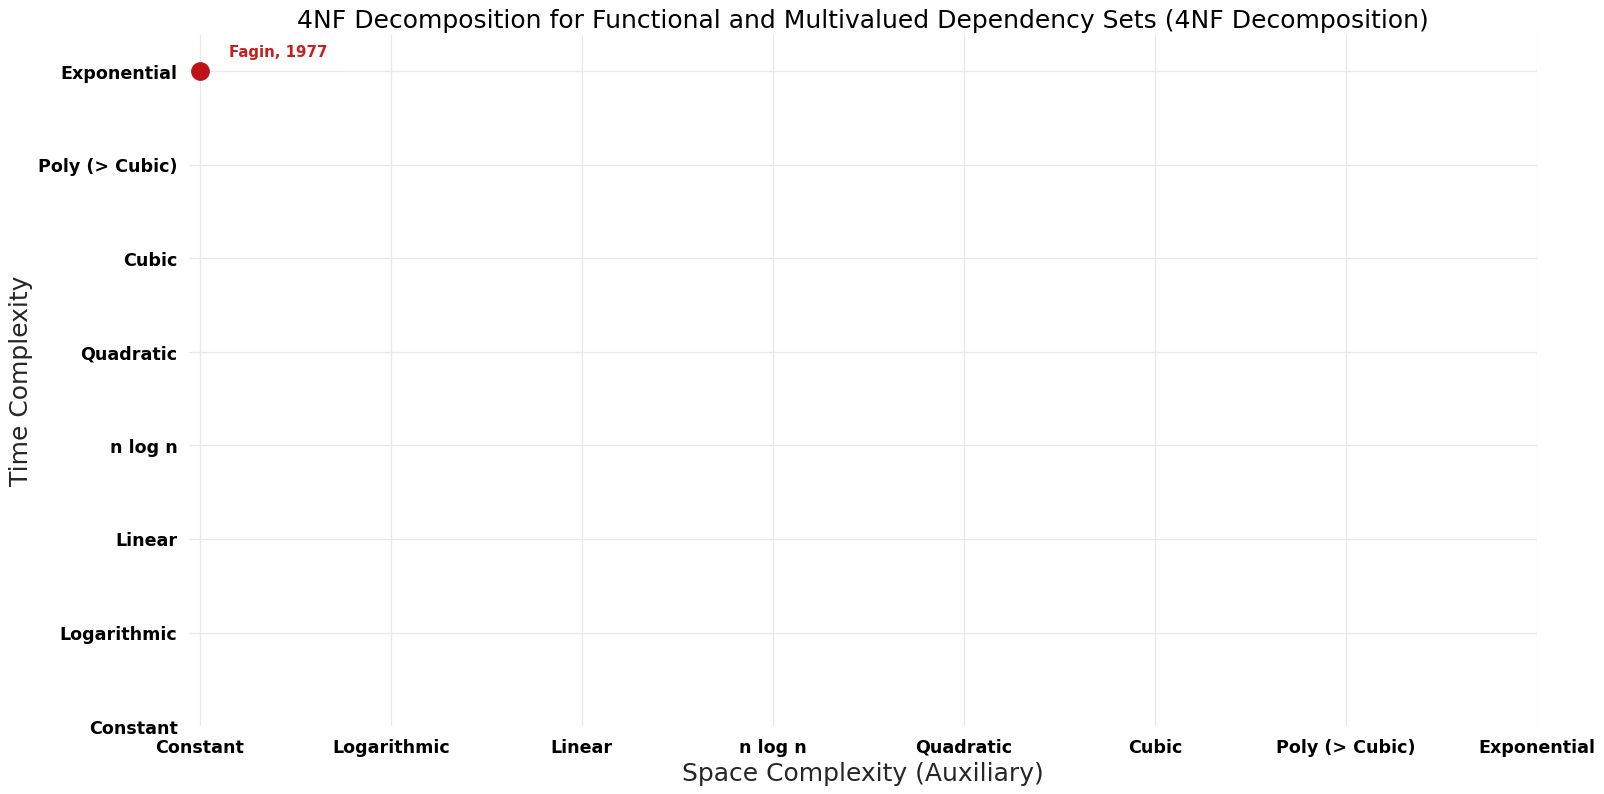 4NF Decomposition - 4NF Decomposition for Functional and Multivalued Dependency Sets - Pareto Frontier.png